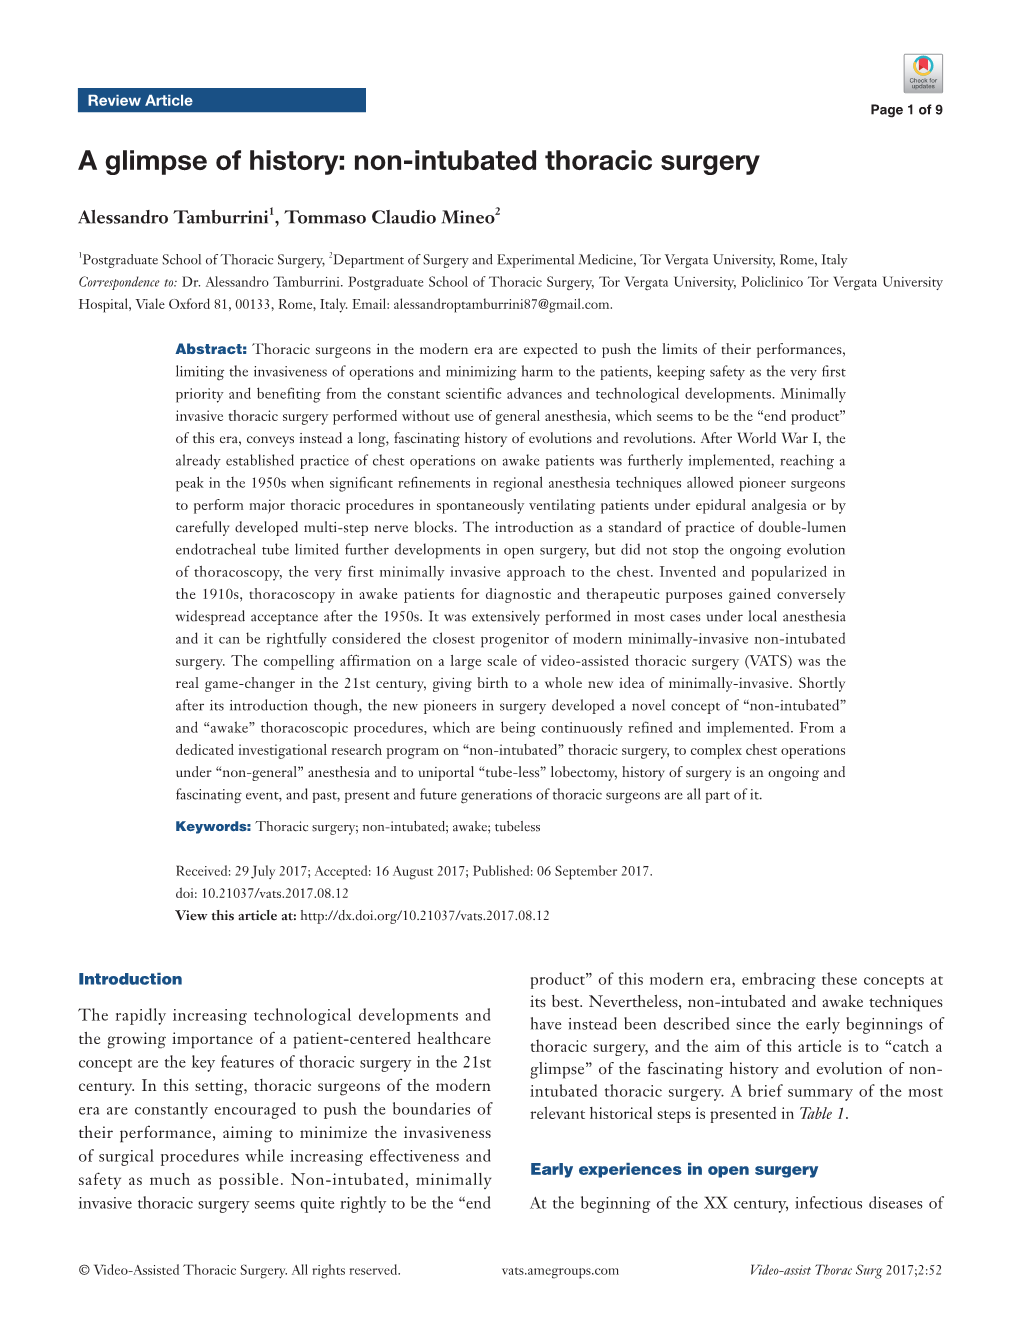 Non-Intubated Thoracic Surgery